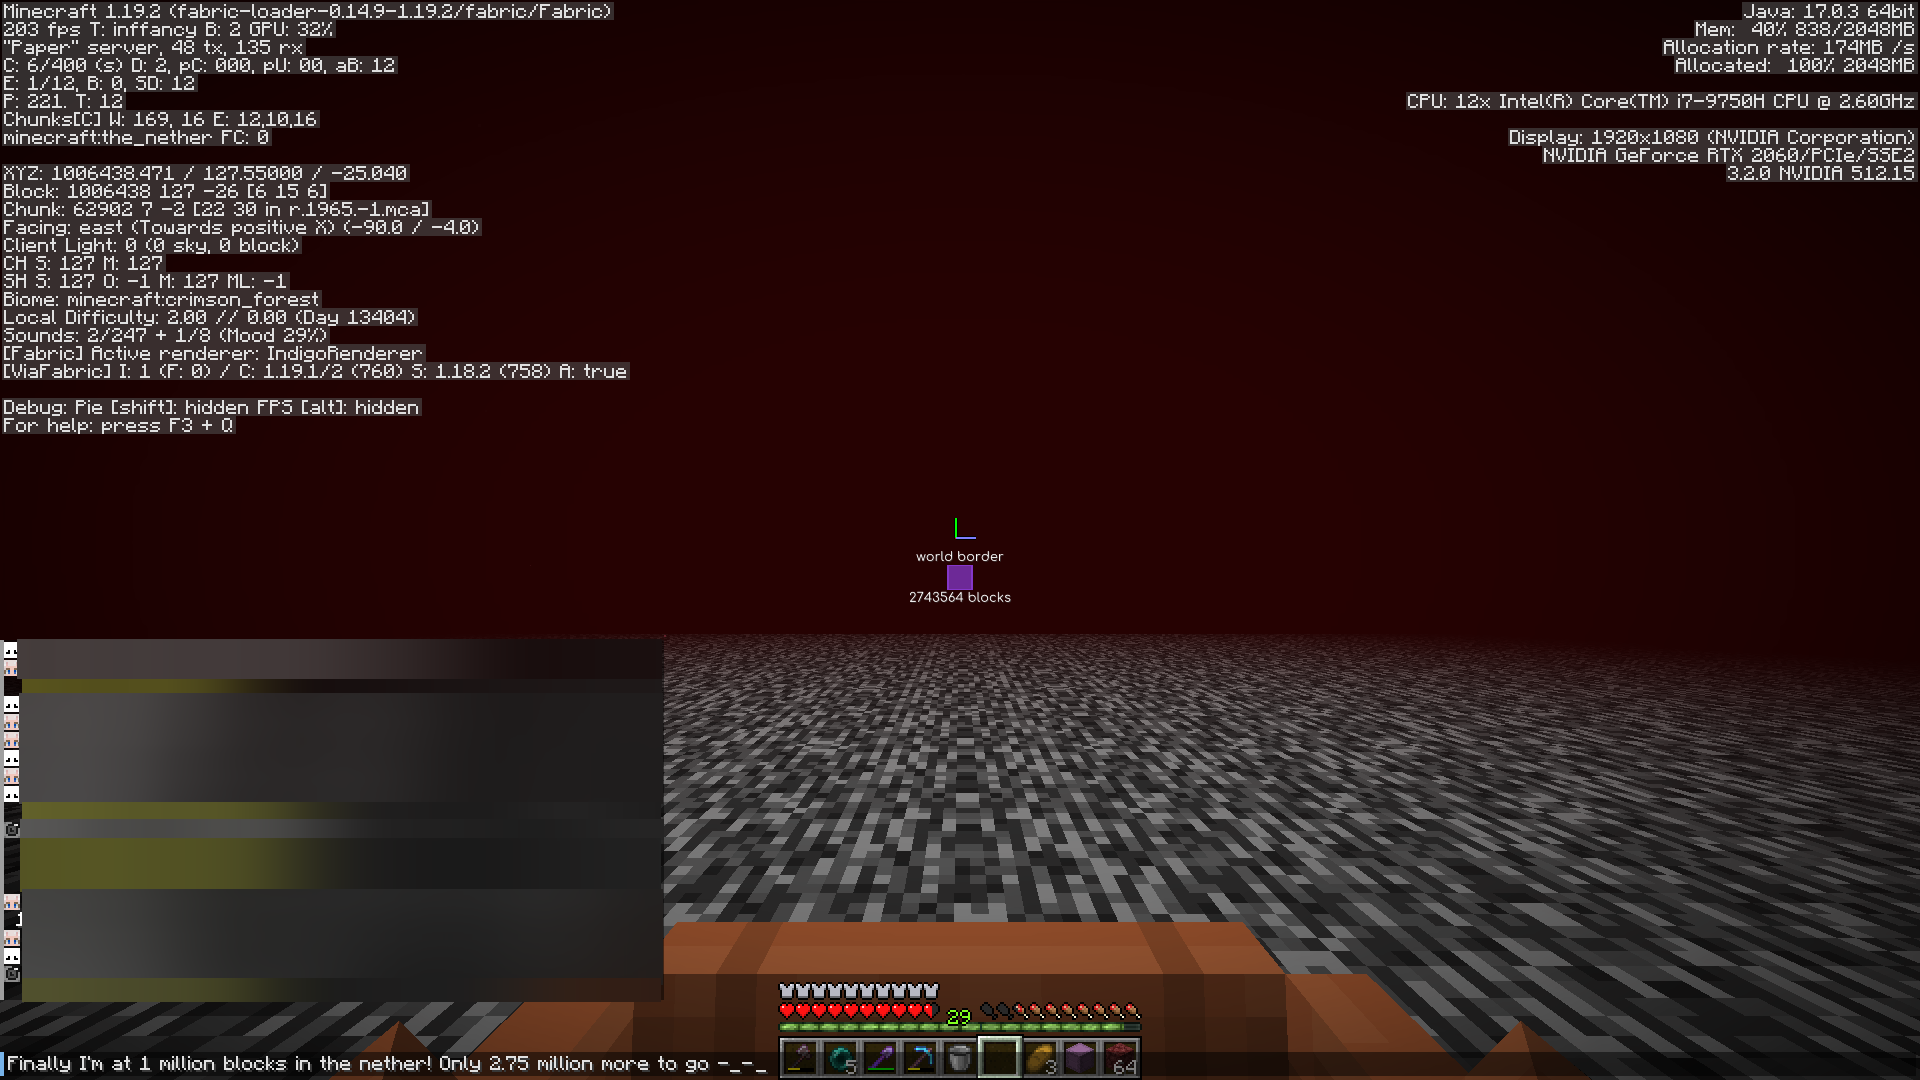 Screenshot of me in The Nether at 1 million blocks on the X axis